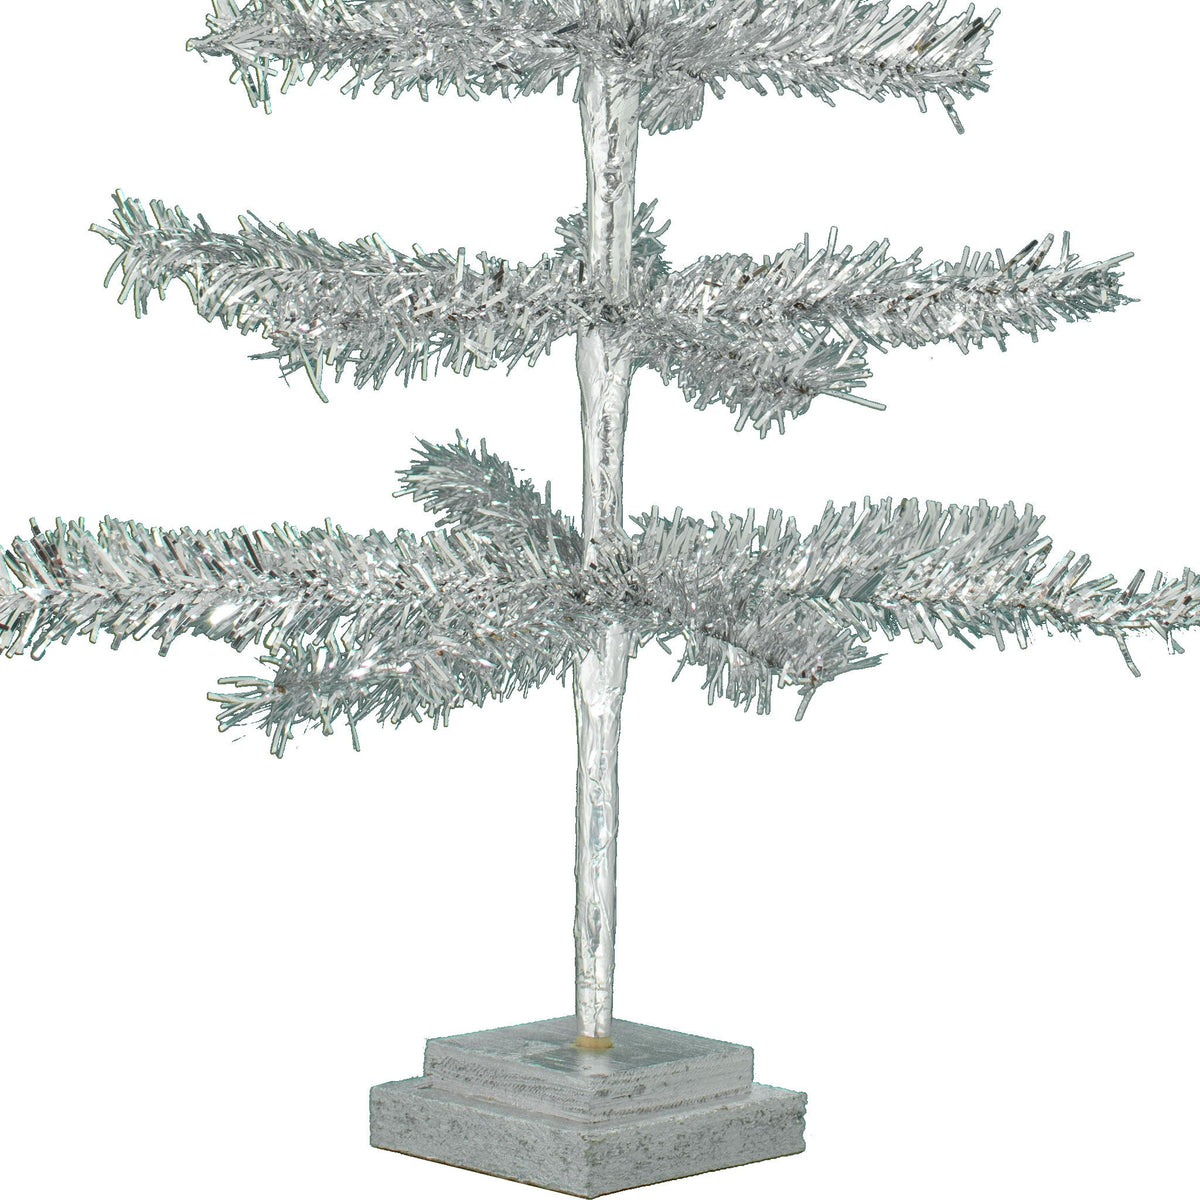 Stand Included: A double-tiered wooden base comes painted in a special color to match your tree.  Stands are made from recycled CDX Plywood with rough edges and cuts.  